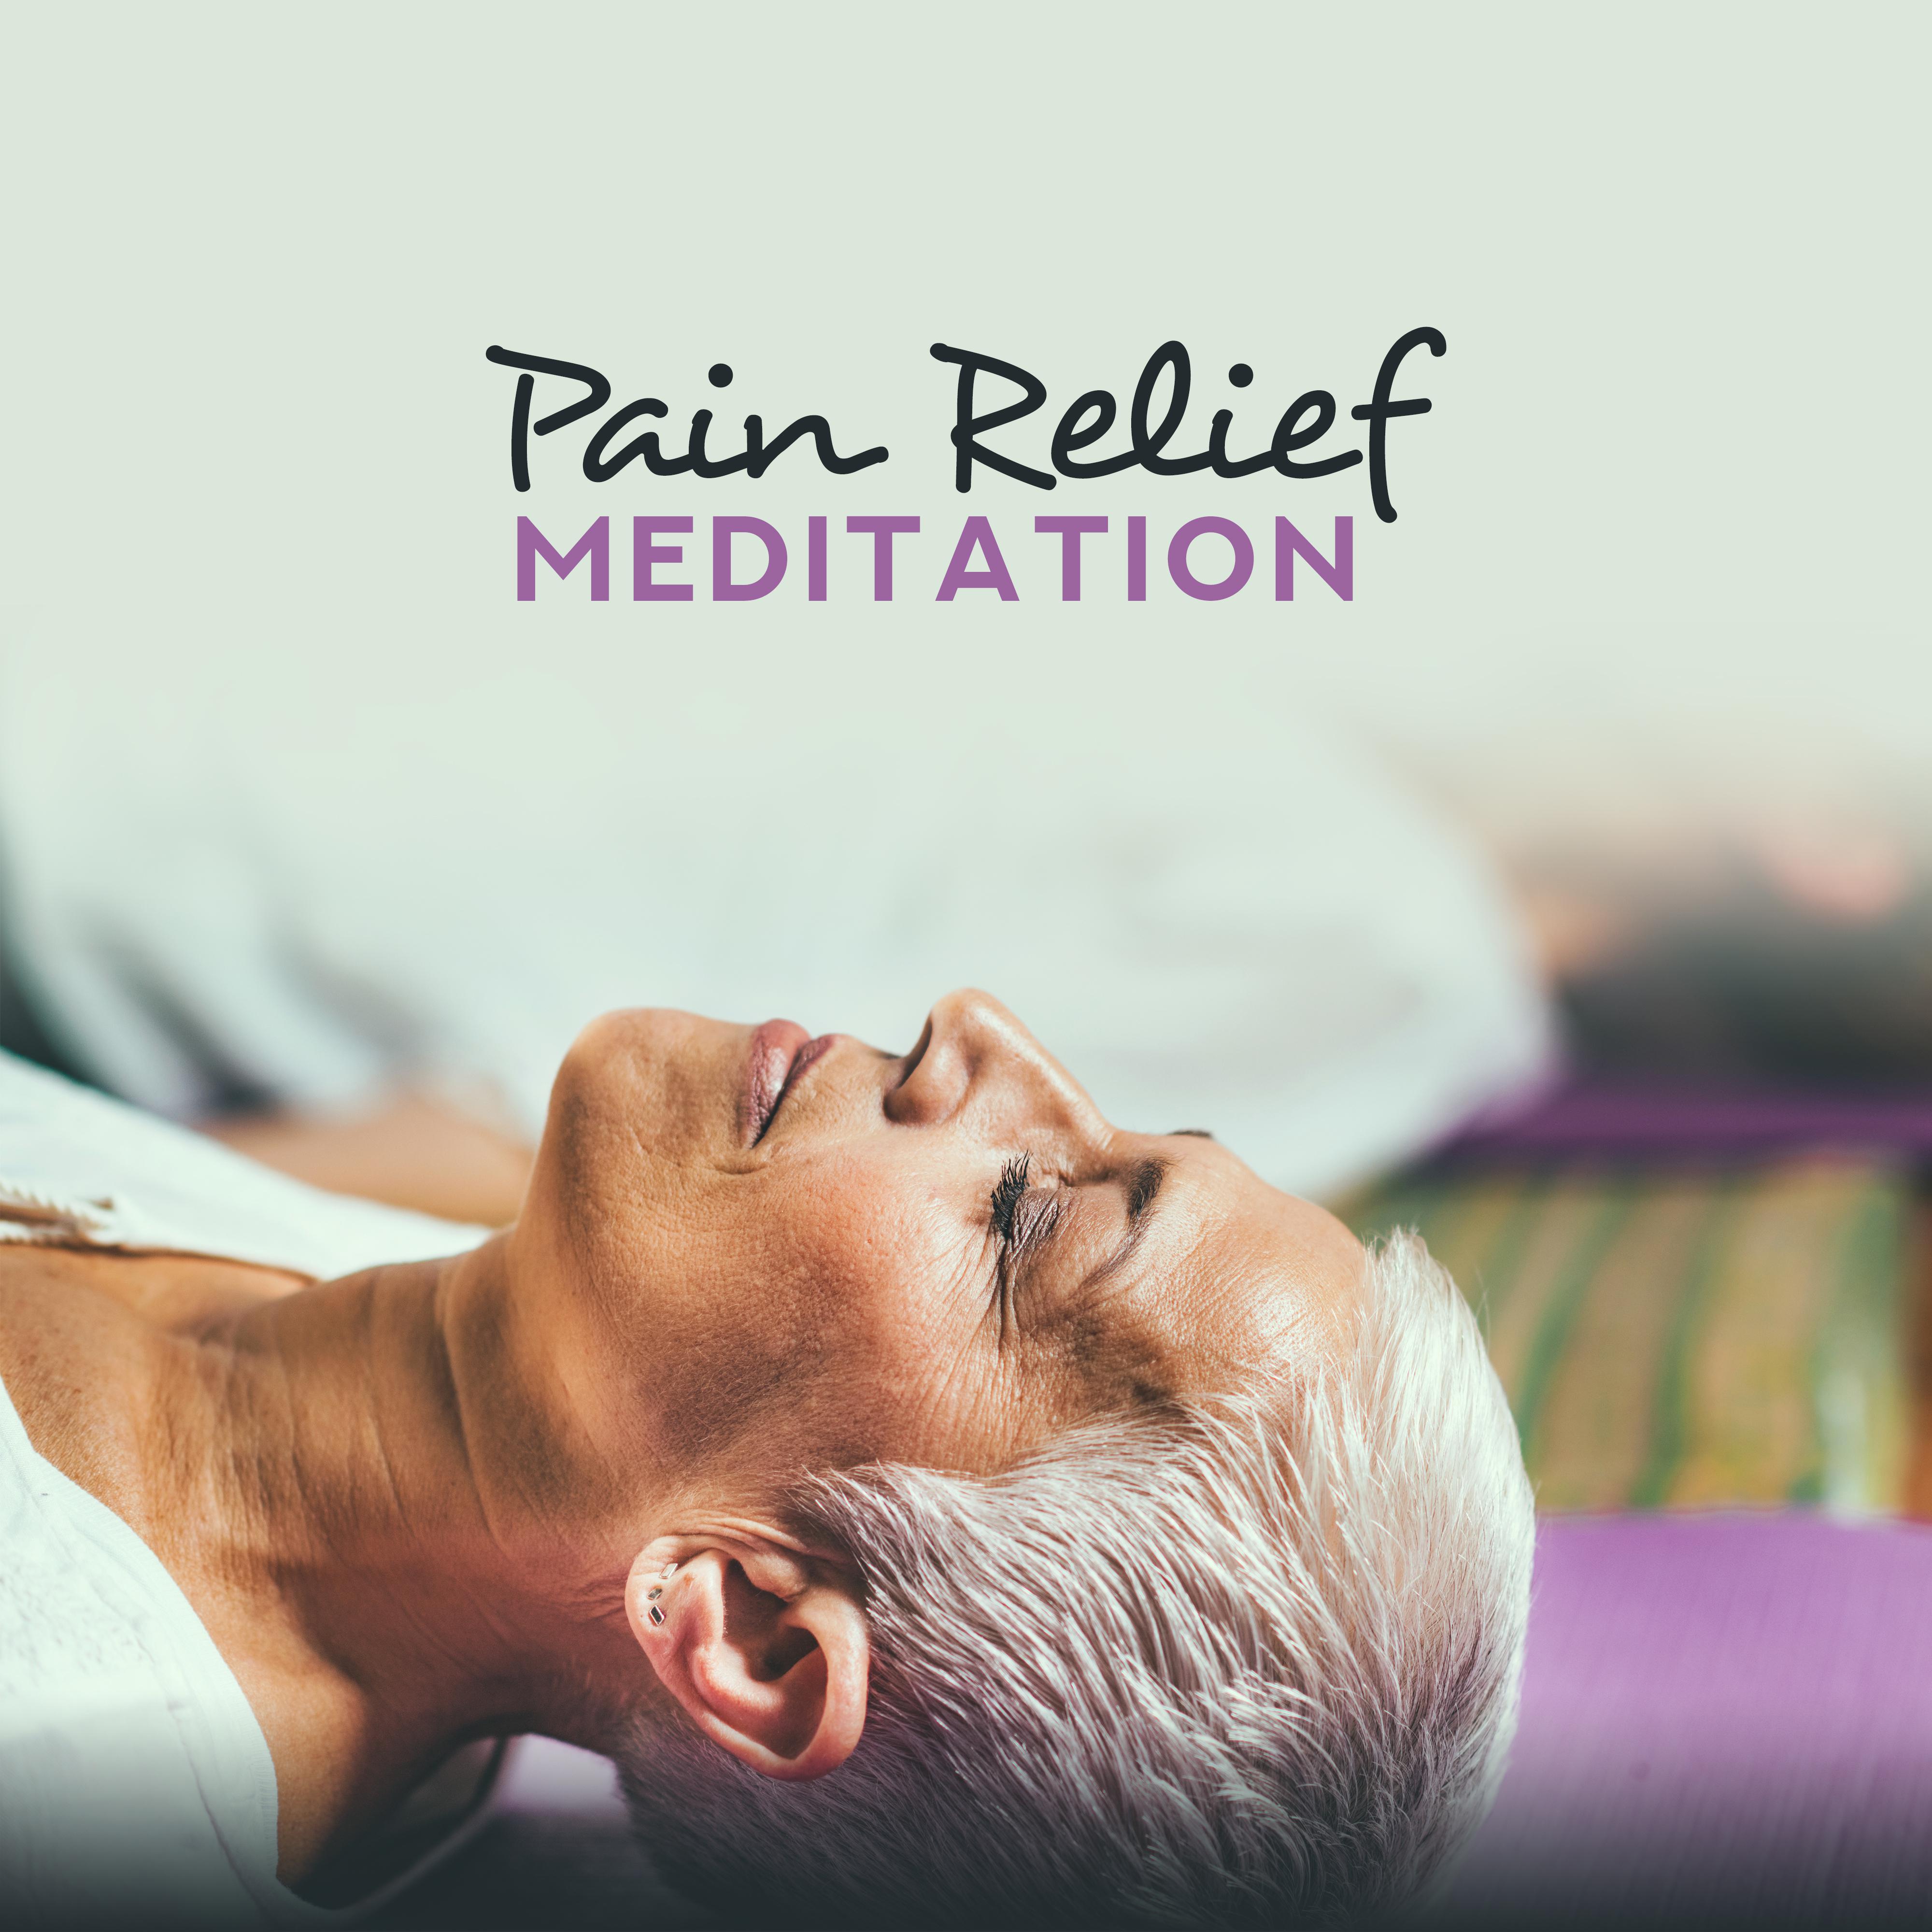 Pain Relief Meditation